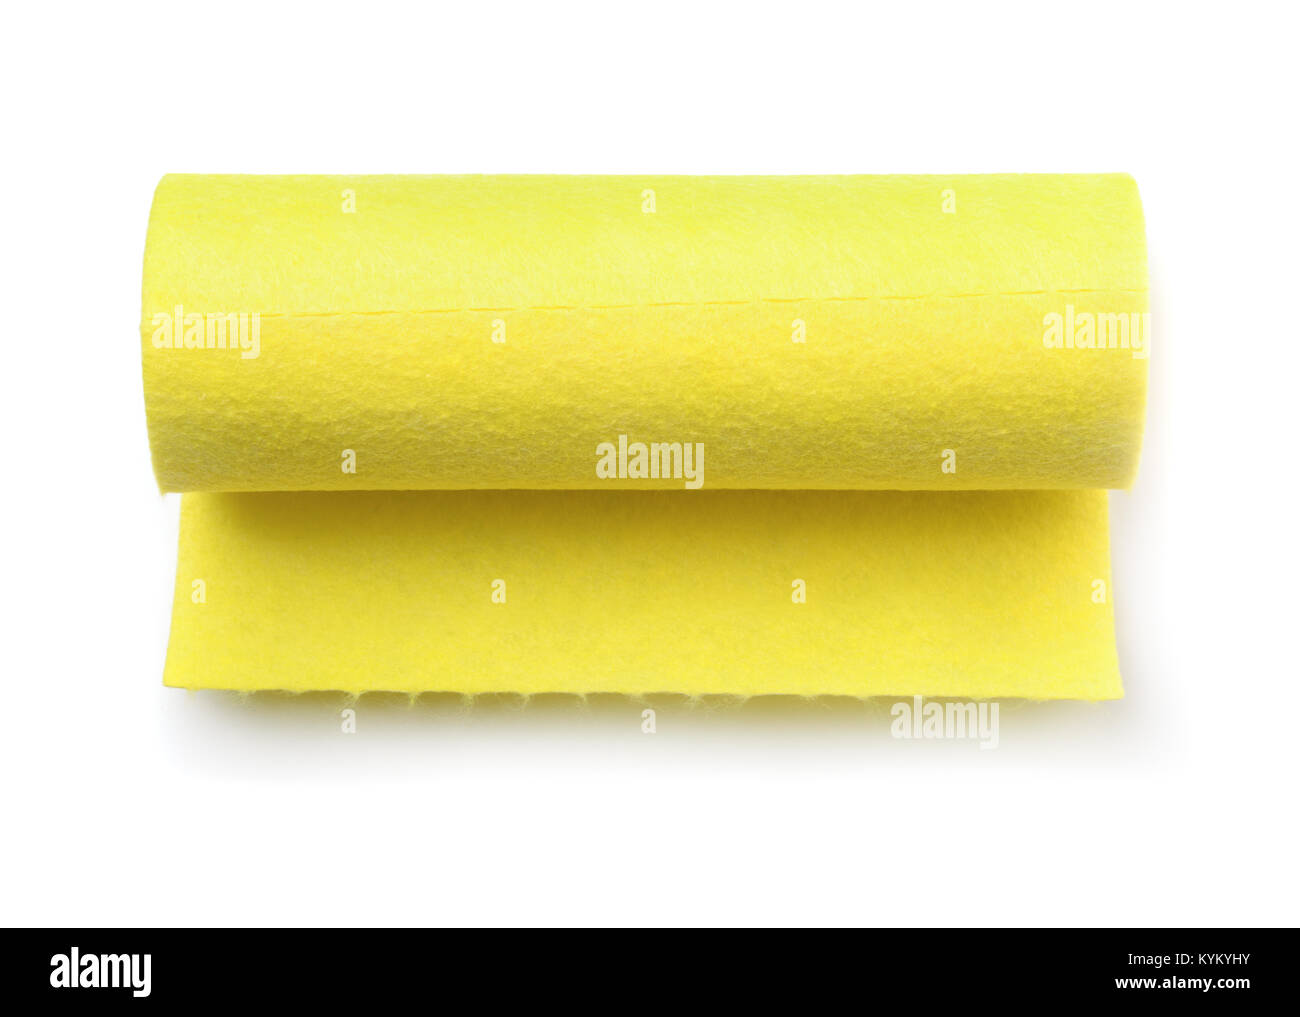 Enormous Roll Of White Felt Fabric On Stand Stock Photo - Download